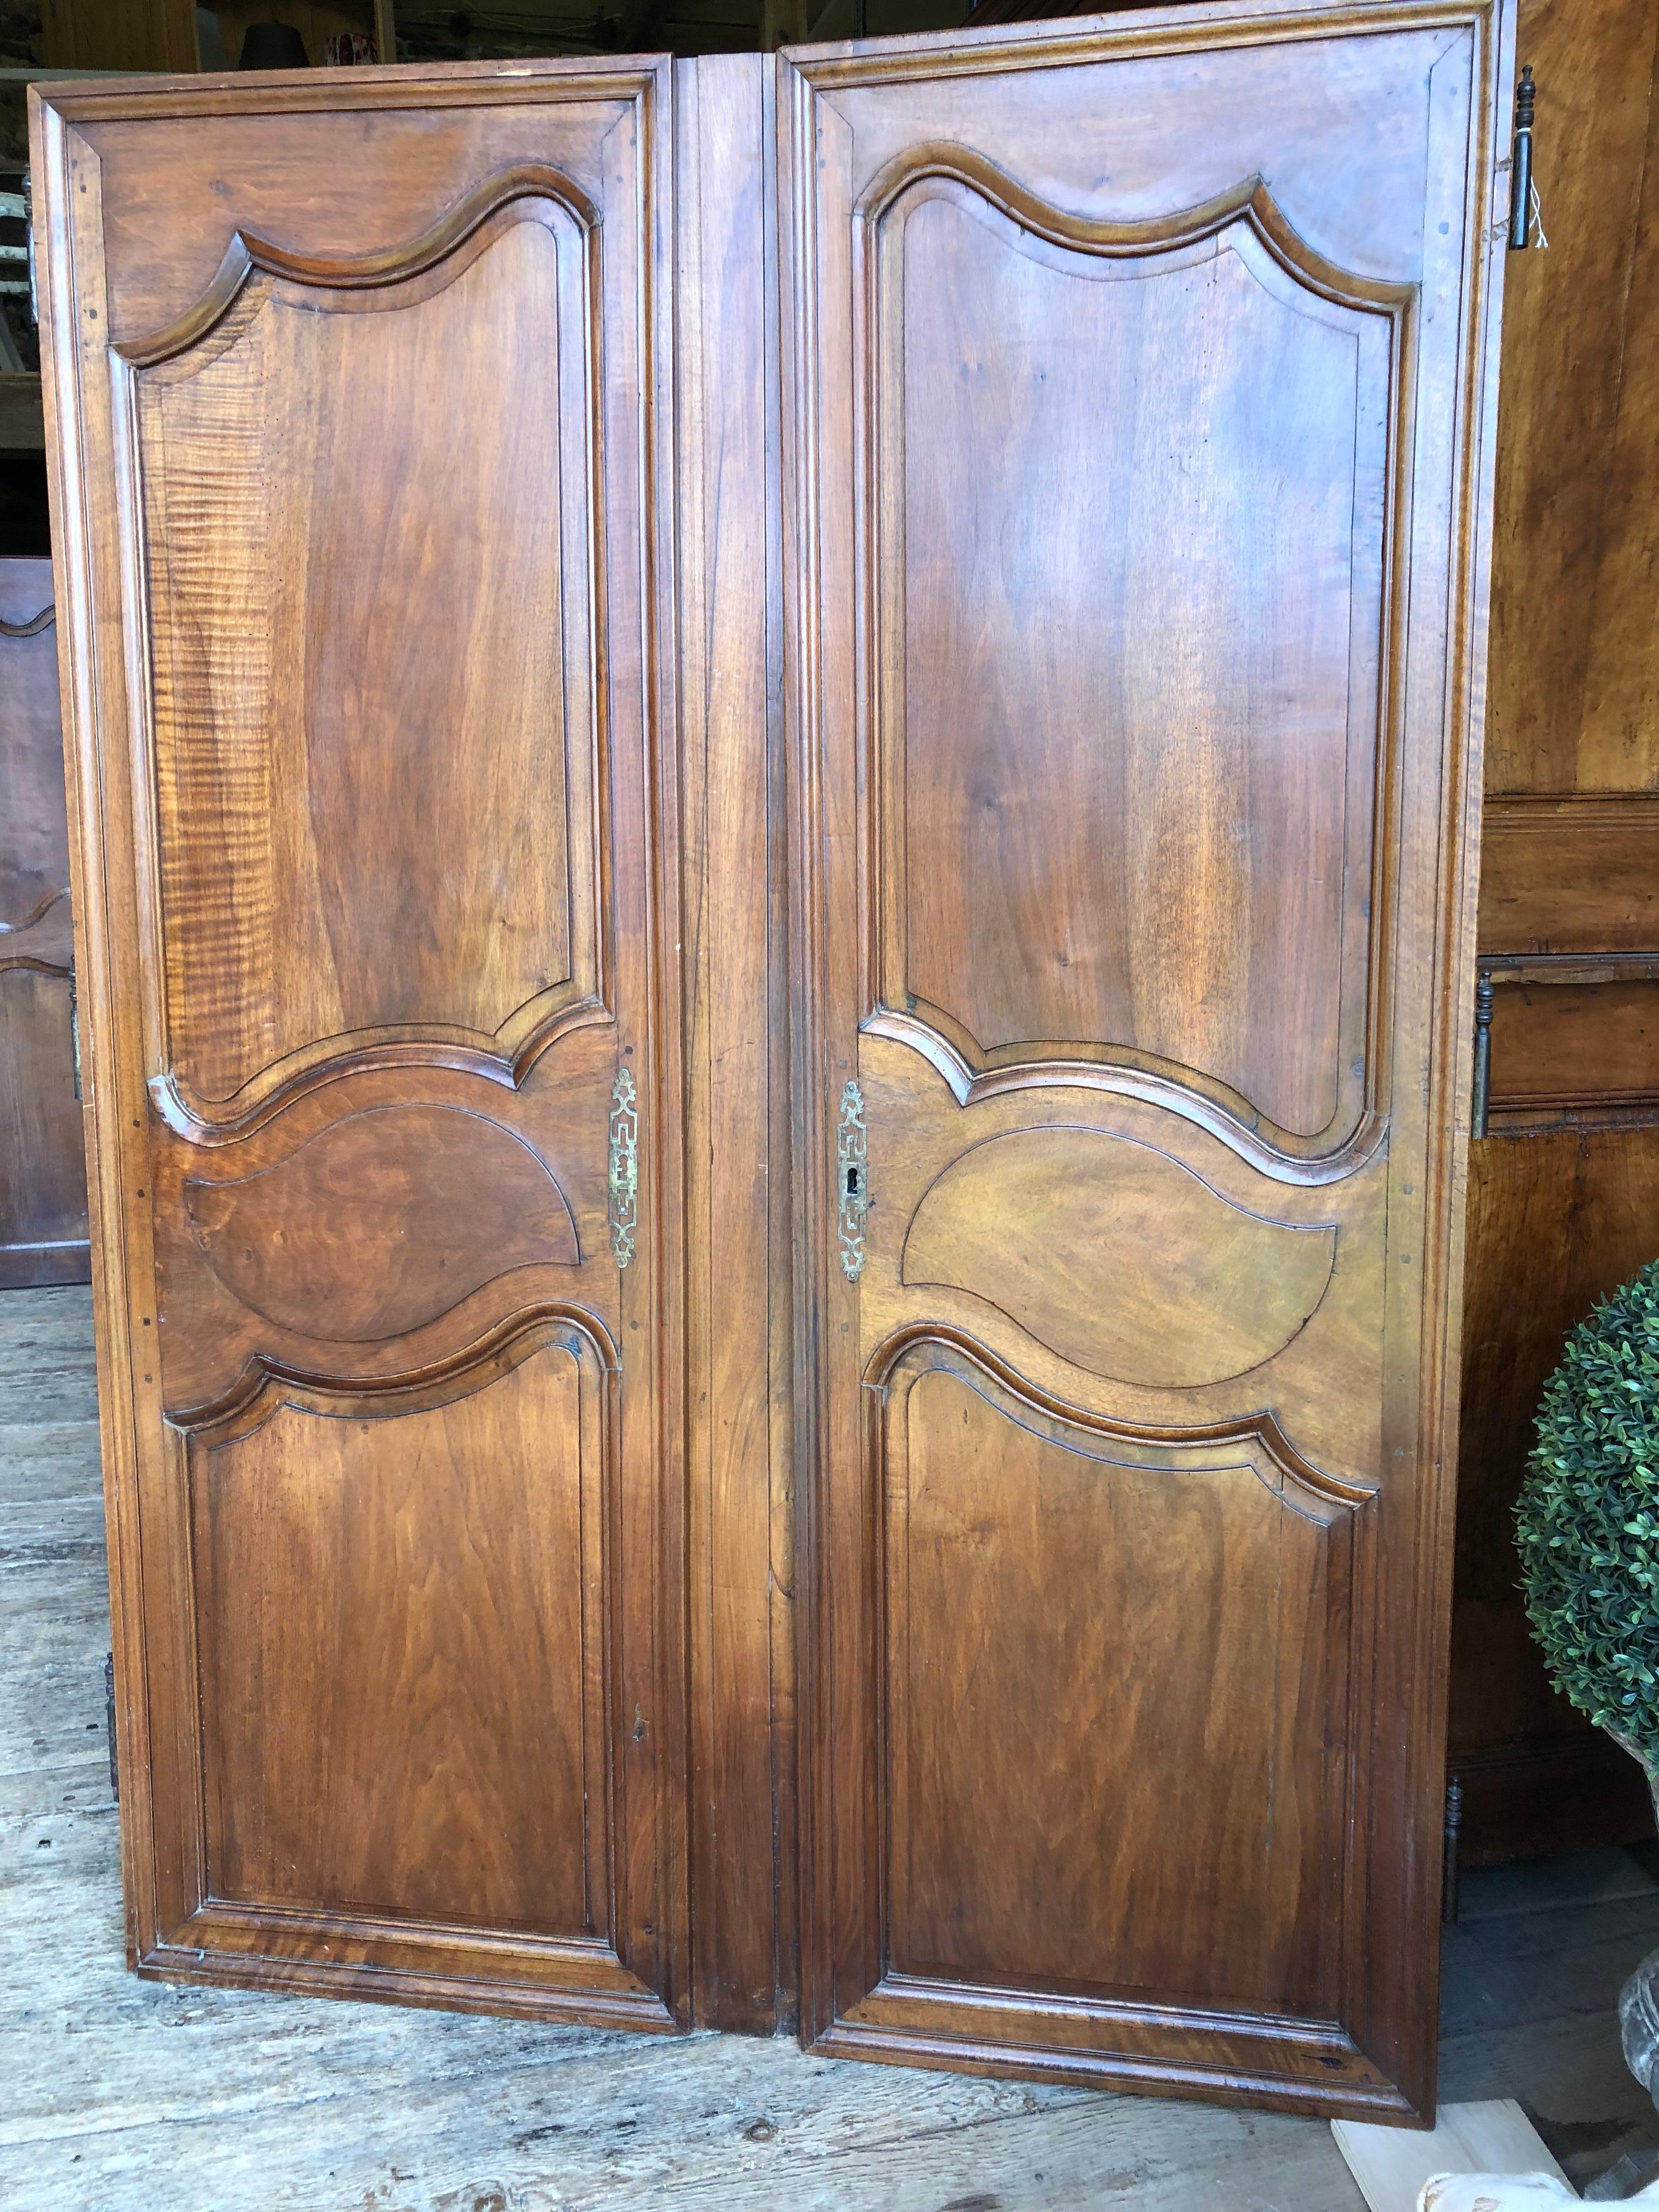 A nice pair of tall Louis XV period walnut armoire doors, circa 1760, nicely paneled and retaining their original iron hardware. 
The center panel which is attached to the left side door can be removed to create a pair of doors the same size with